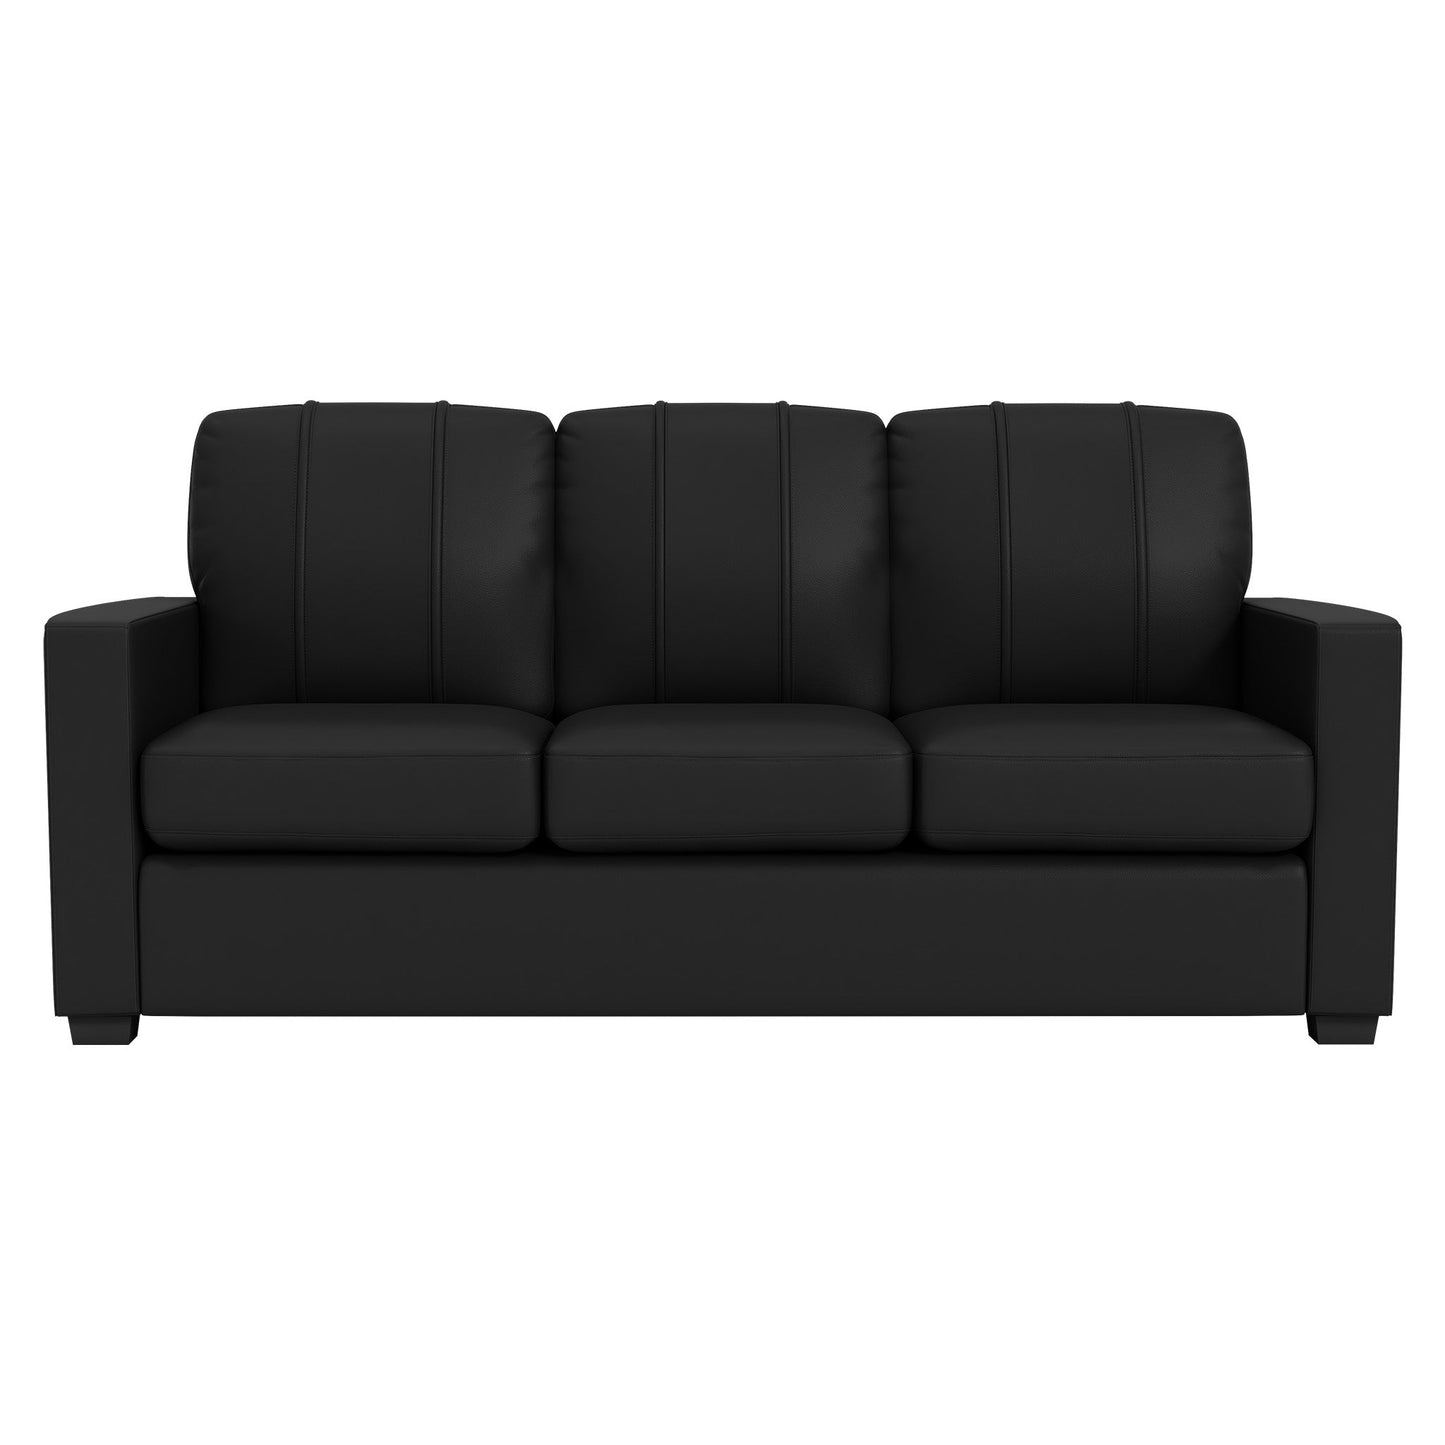 Silver Sofa with Los Angeles Dodgers 2020 Championship Logo